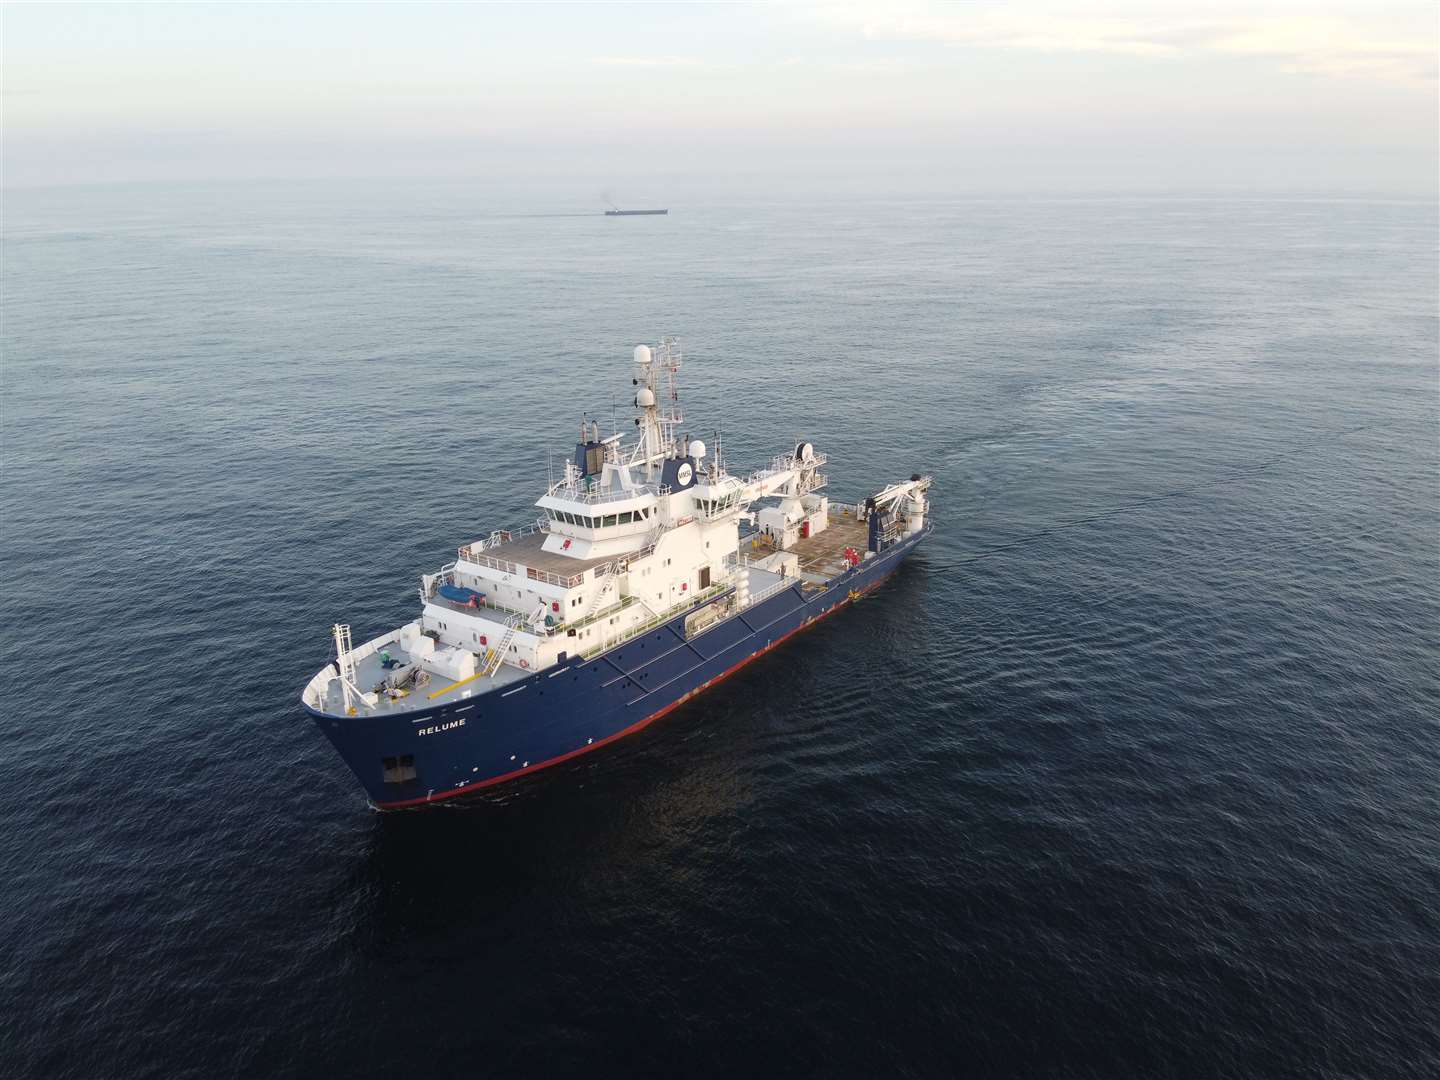 MV Relume during the offshore survey work for the West of Orkney wind farm.